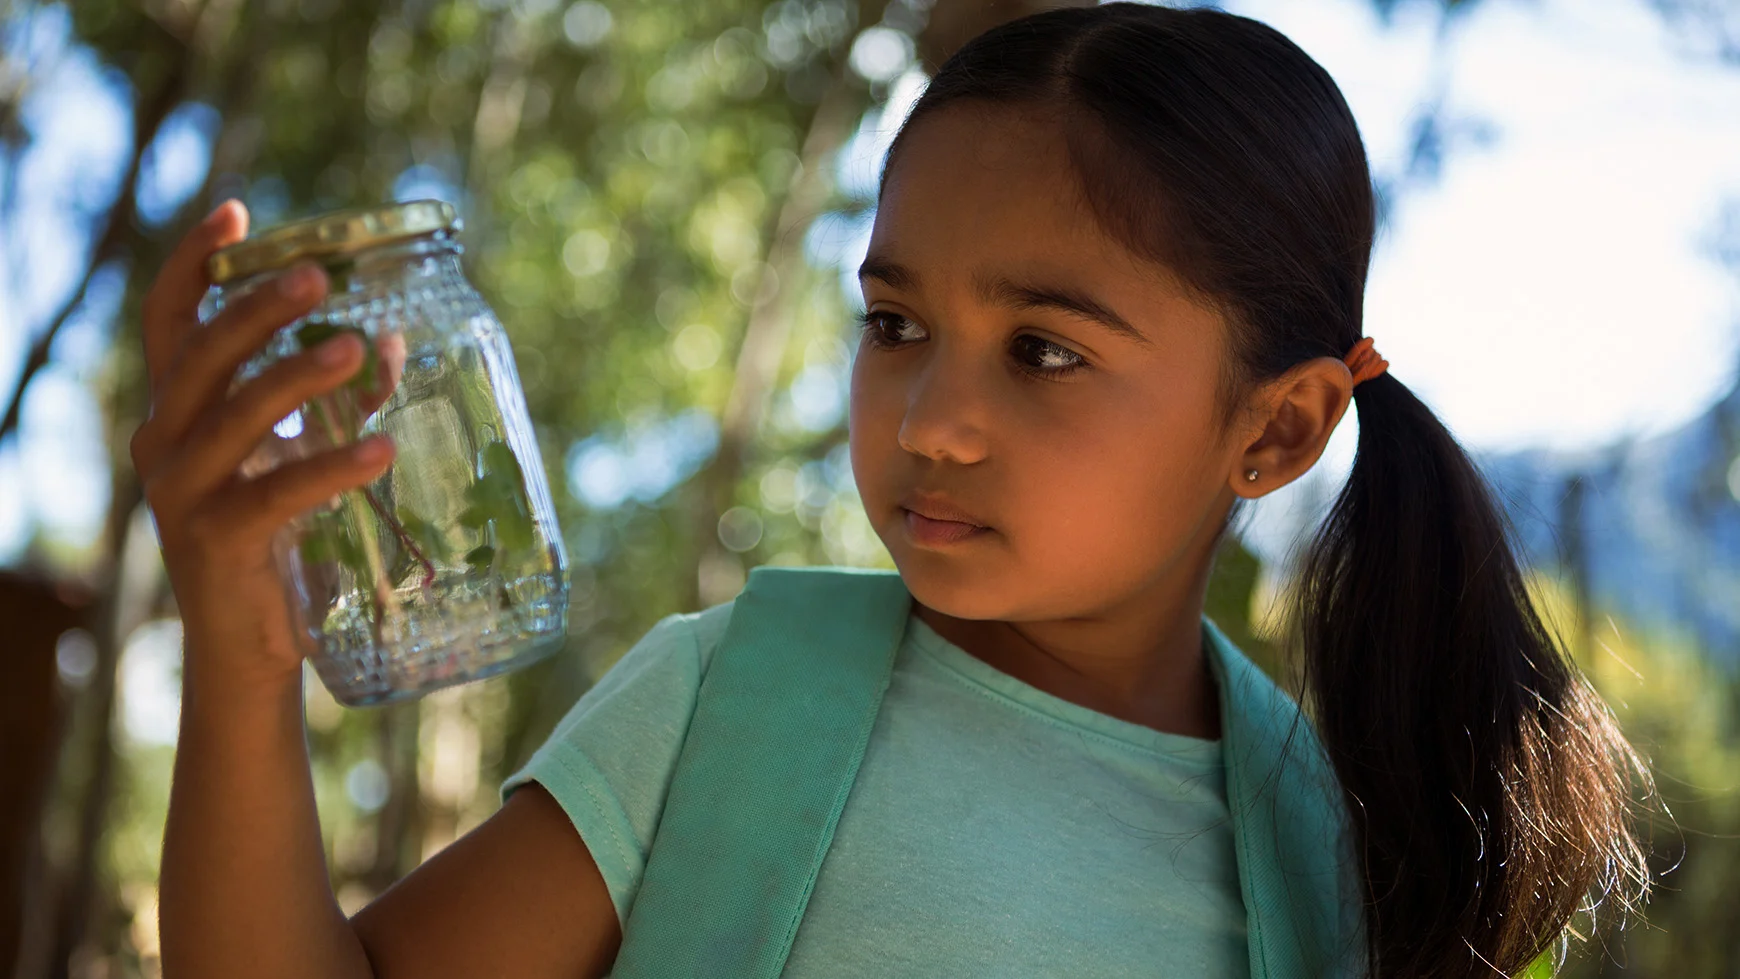 A girl looks at an insect she caught in a jar. 